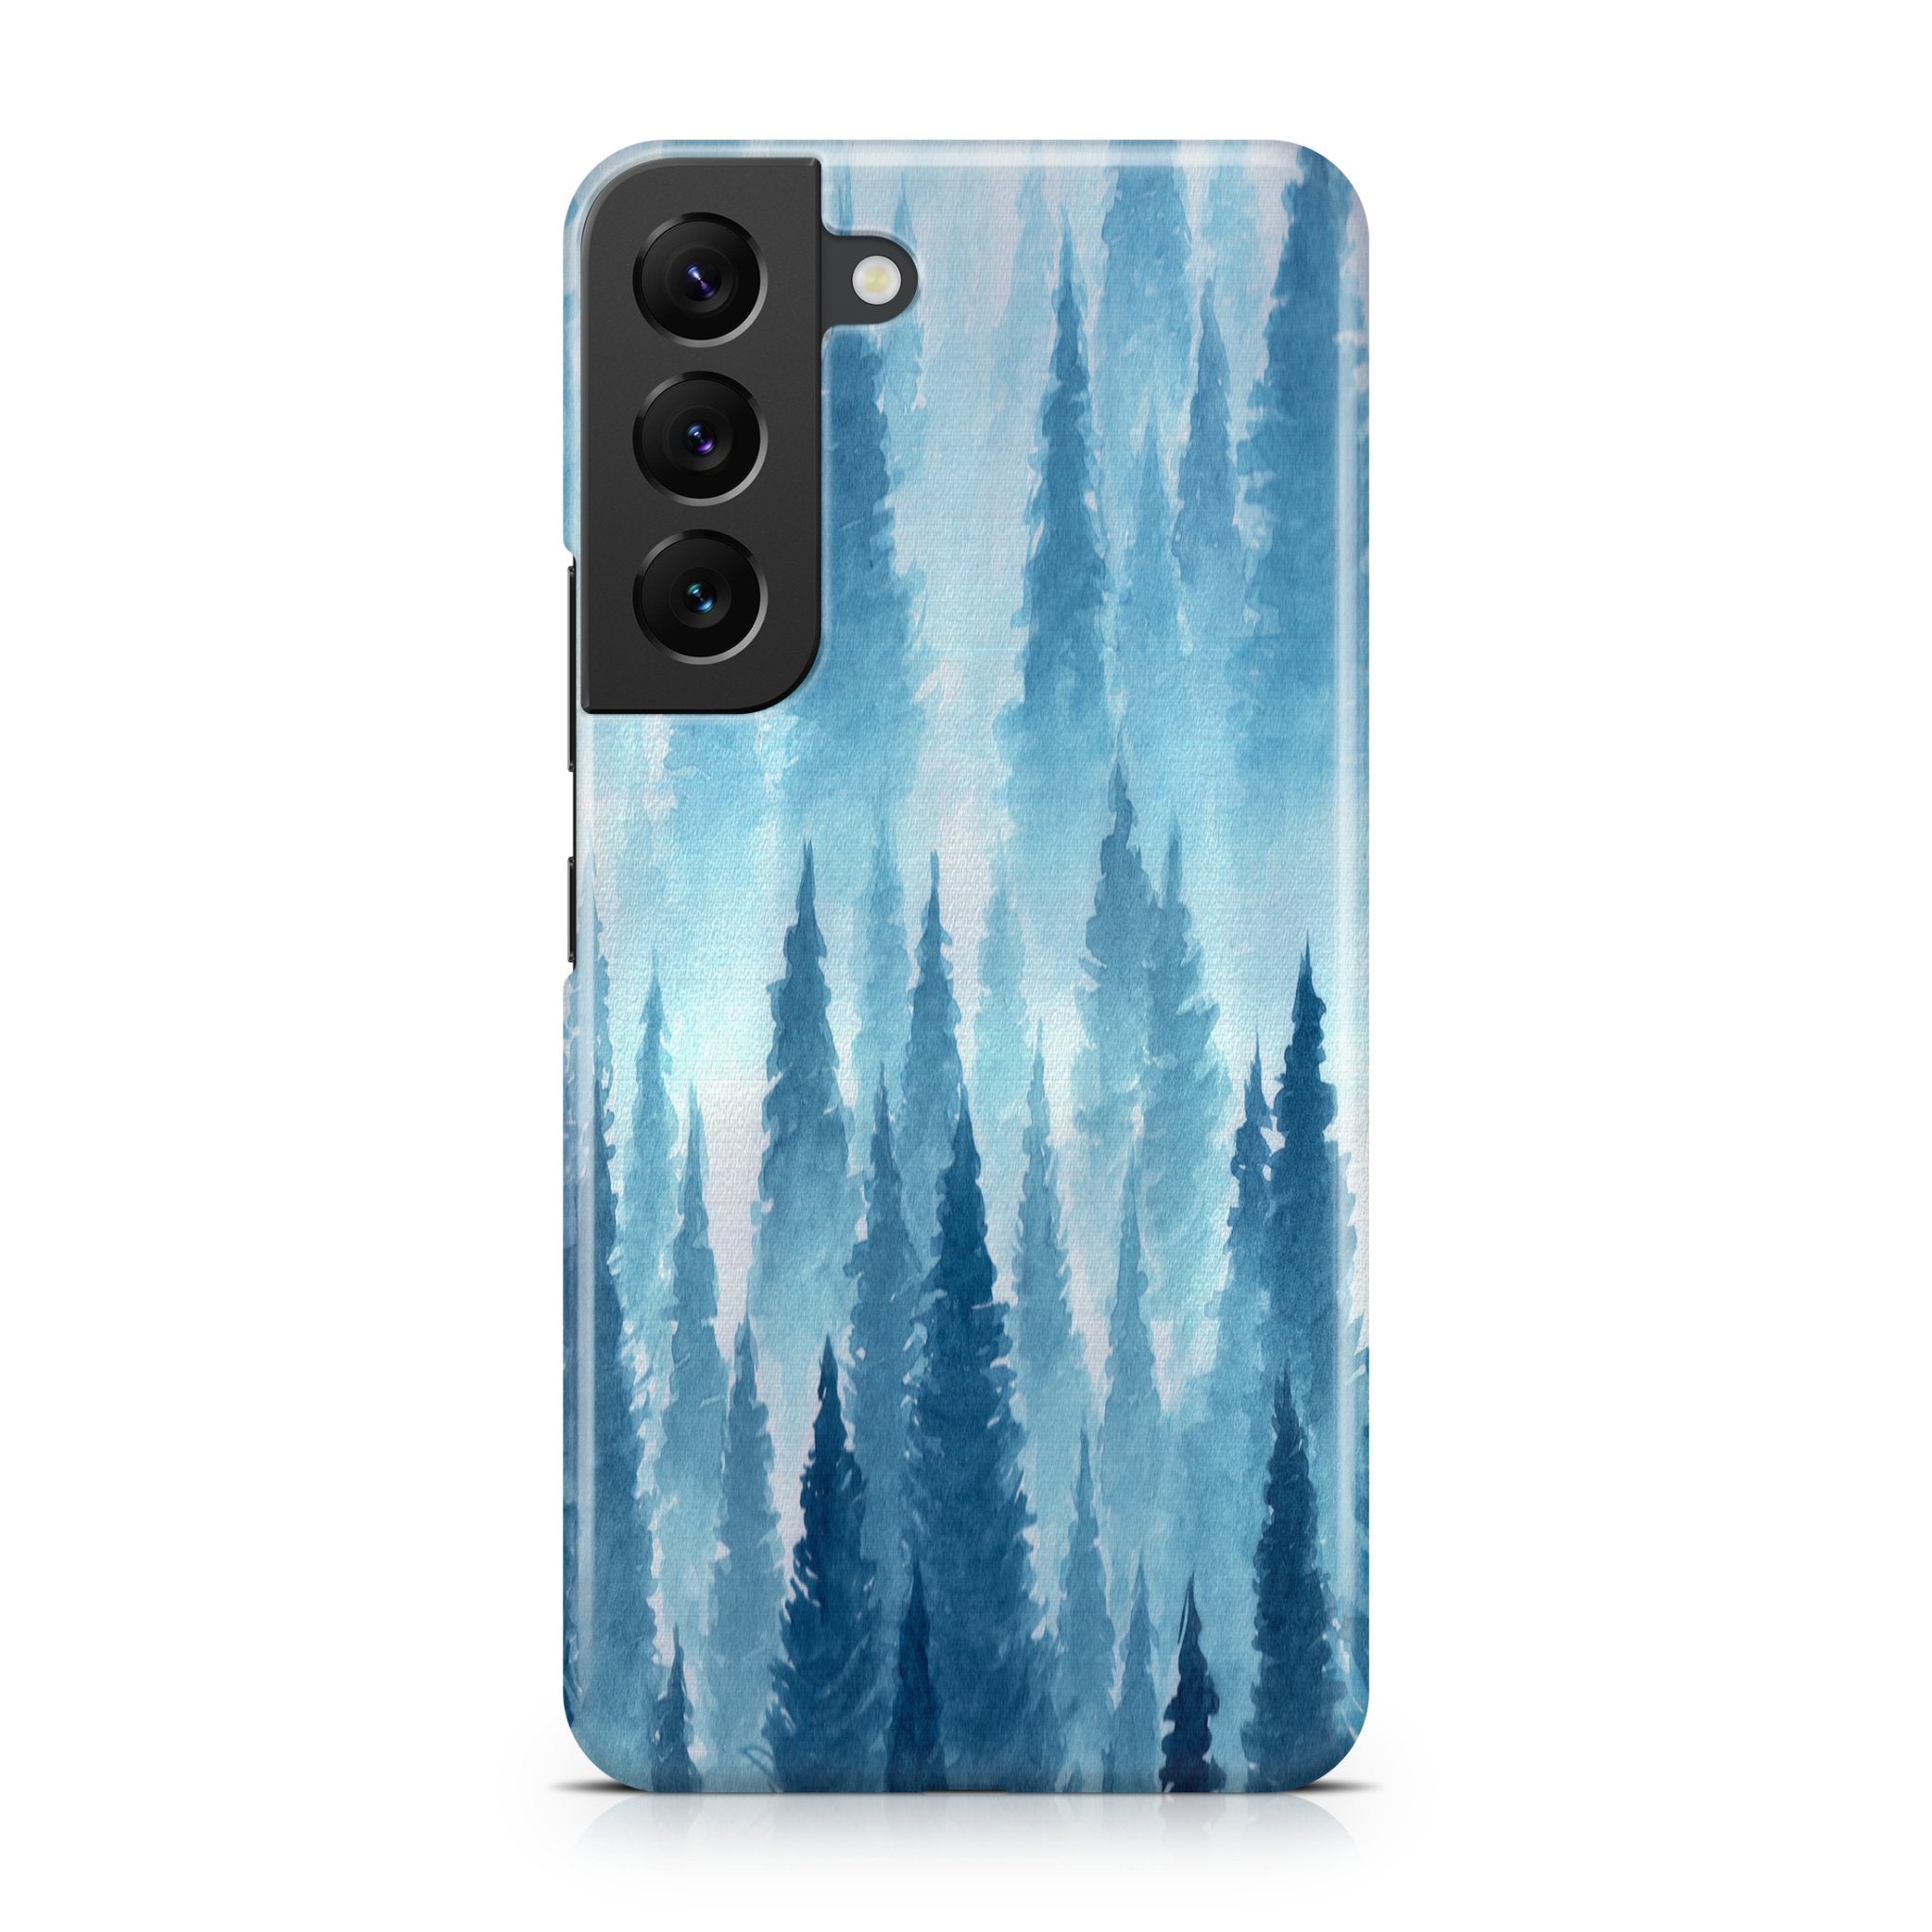 Blue Winter Forest - Samsung phone case designs by CaseSwagger